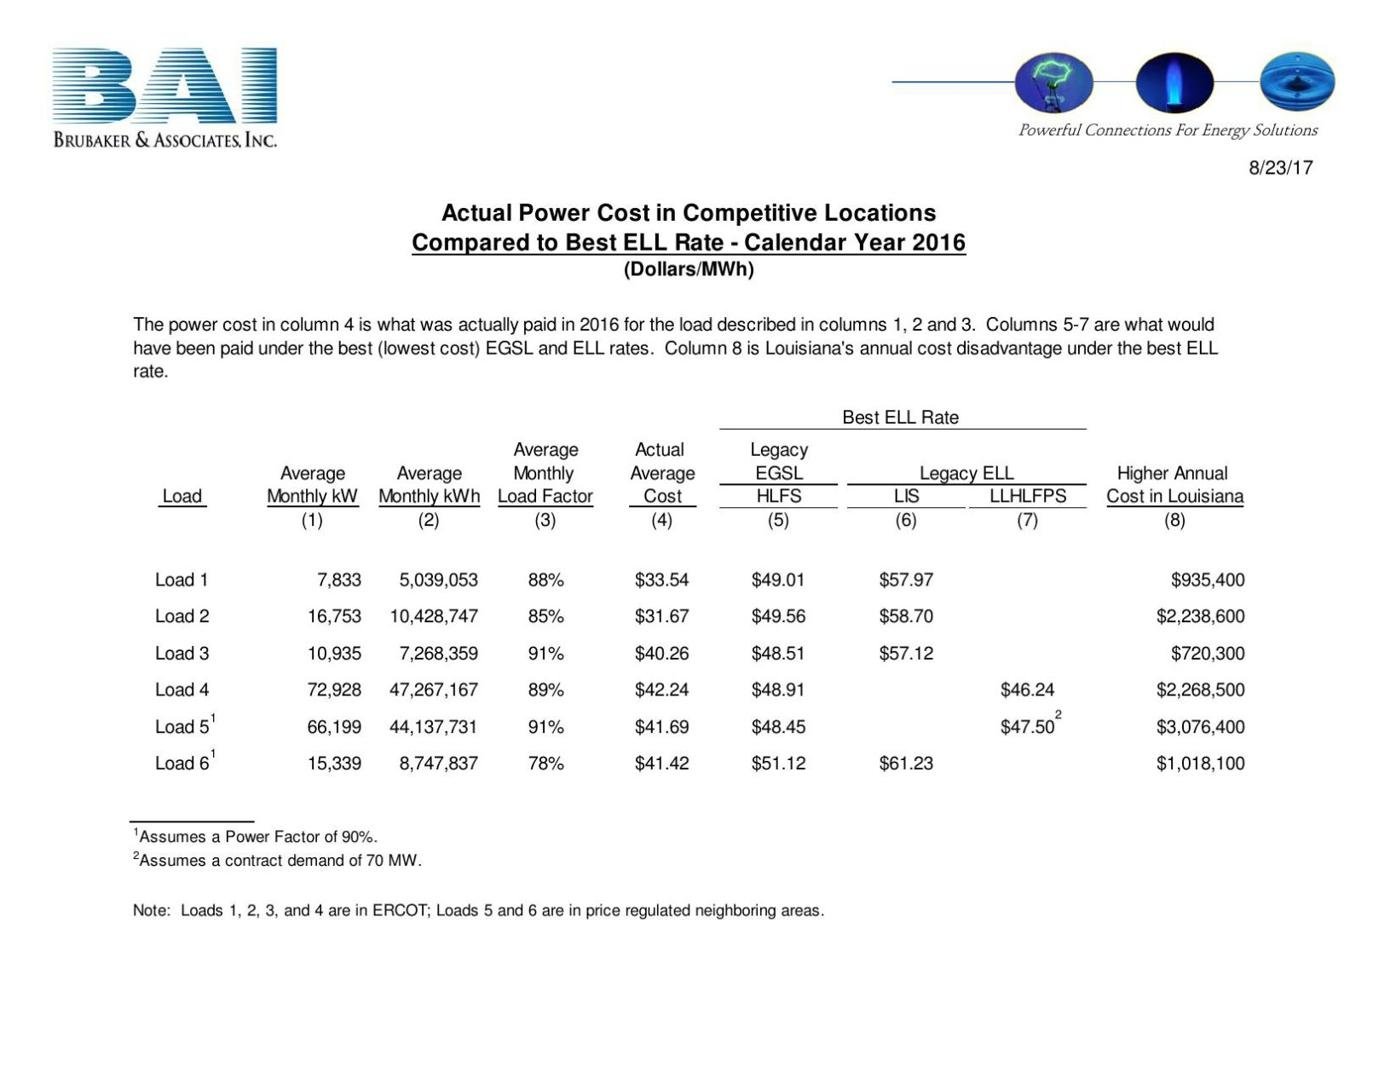 Customer Choice Actual Power Cost in Competitive Locations Compared to